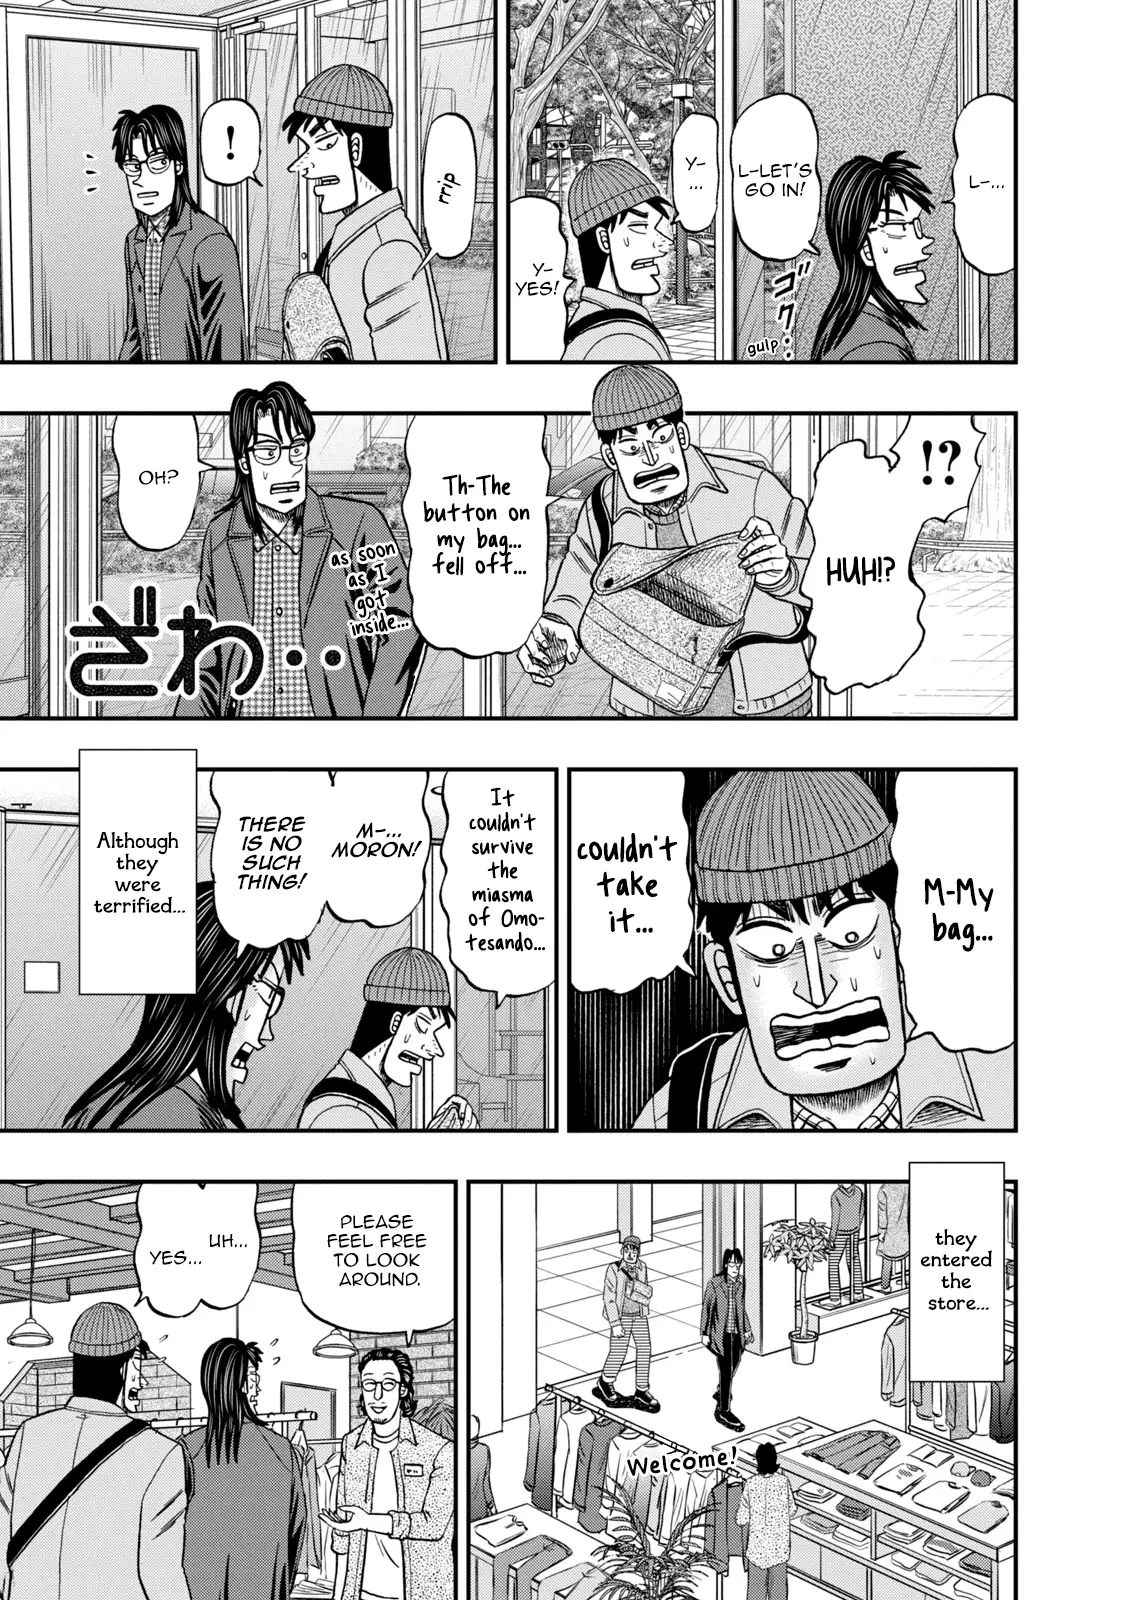 Life In Tokyo Ichijou - 11 page 11-9ae2b427